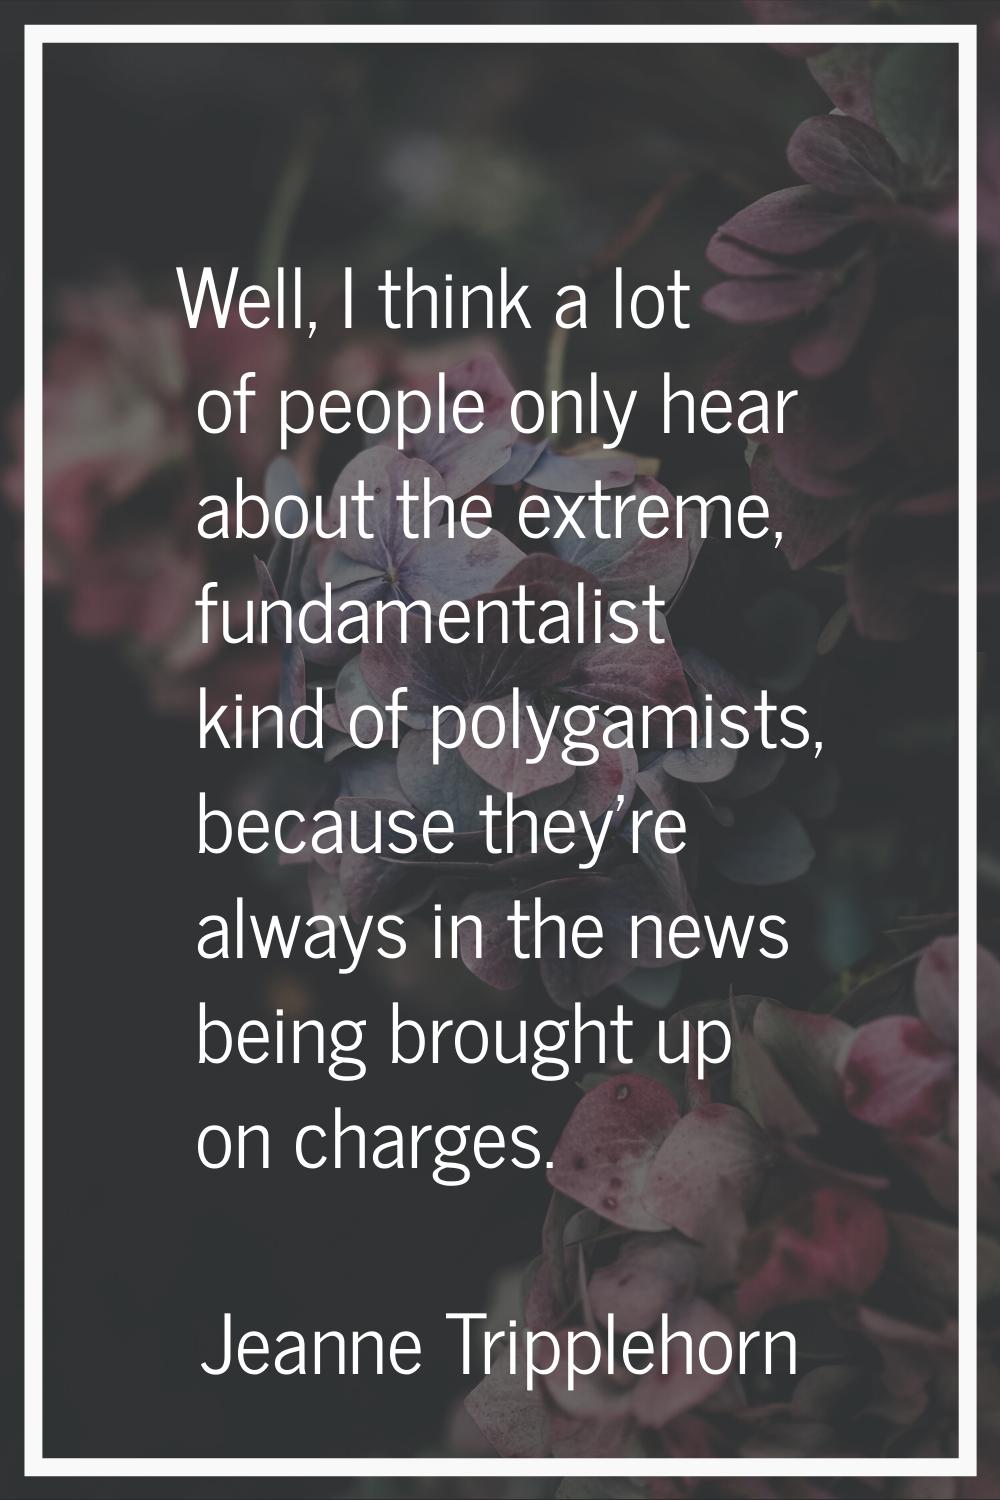 Well, I think a lot of people only hear about the extreme, fundamentalist kind of polygamists, beca